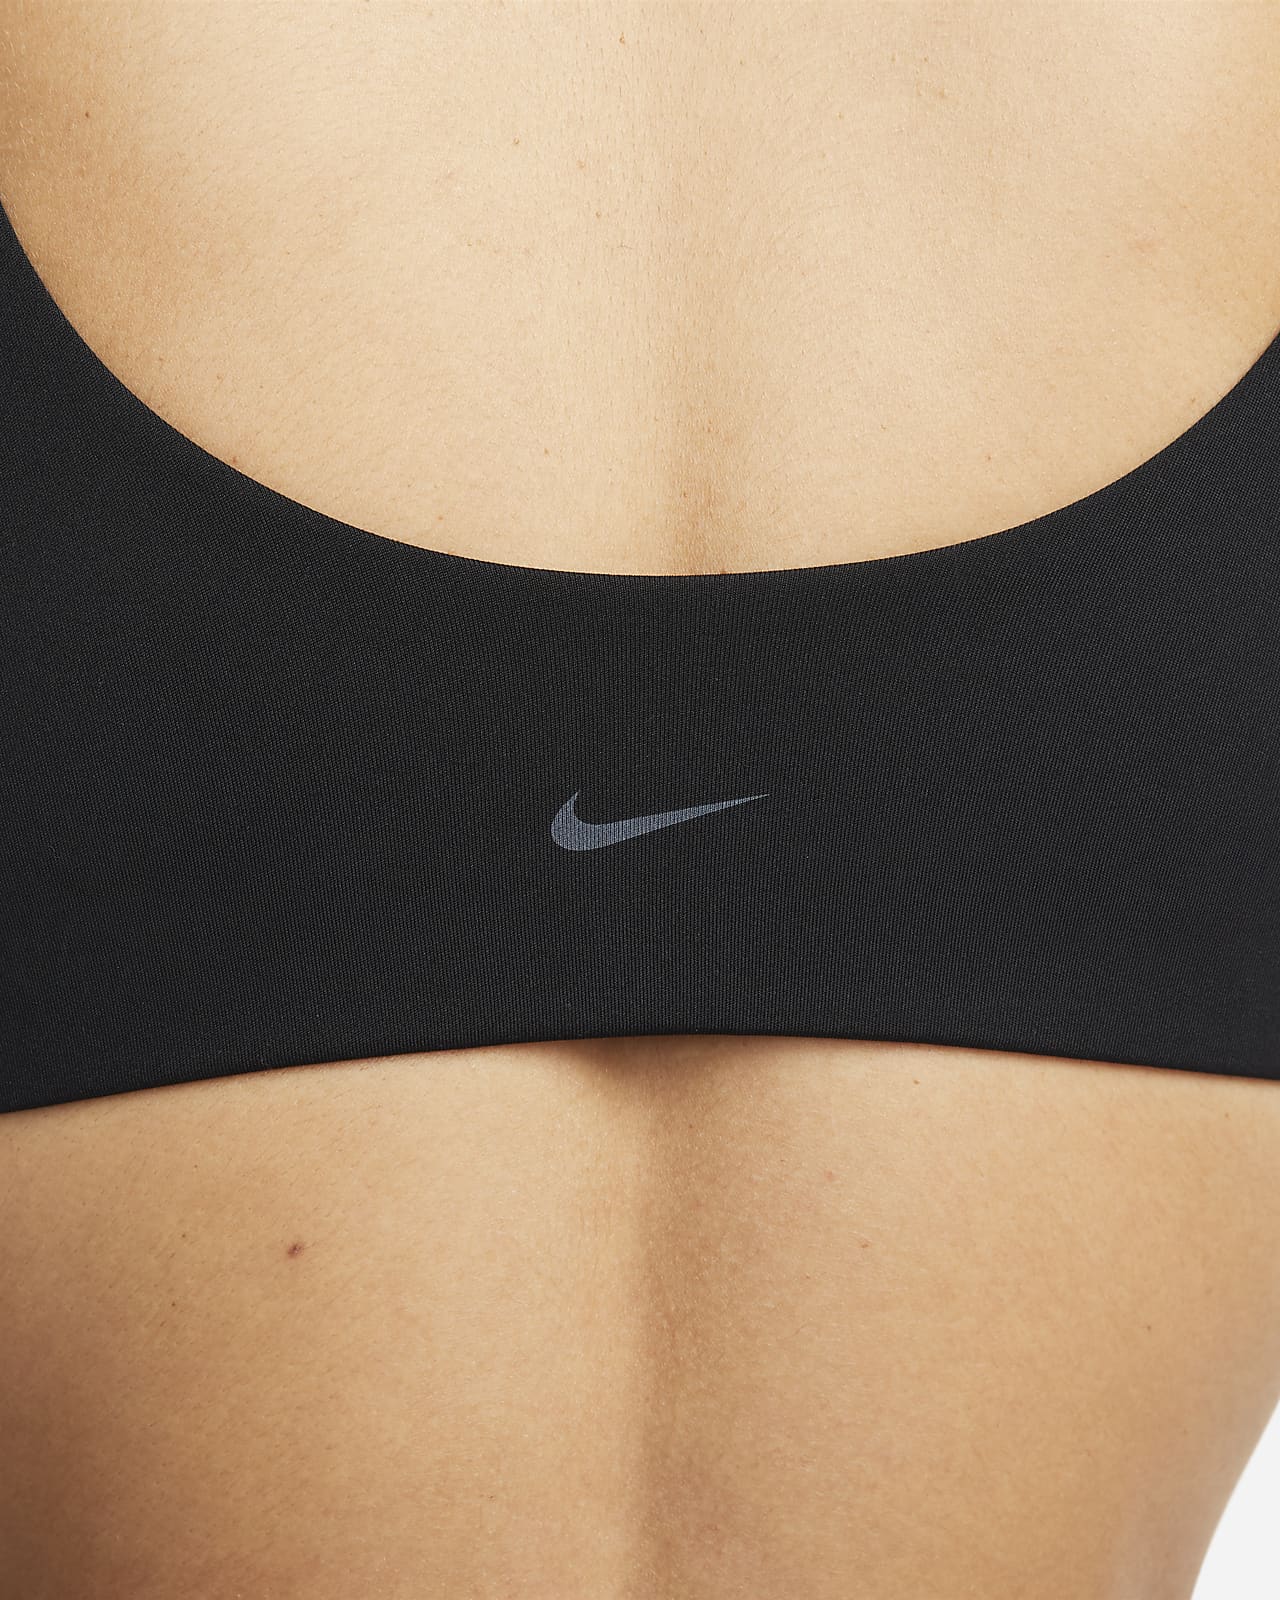 The New Nike Alate Sports Bras Will Support You In Your Everyday life